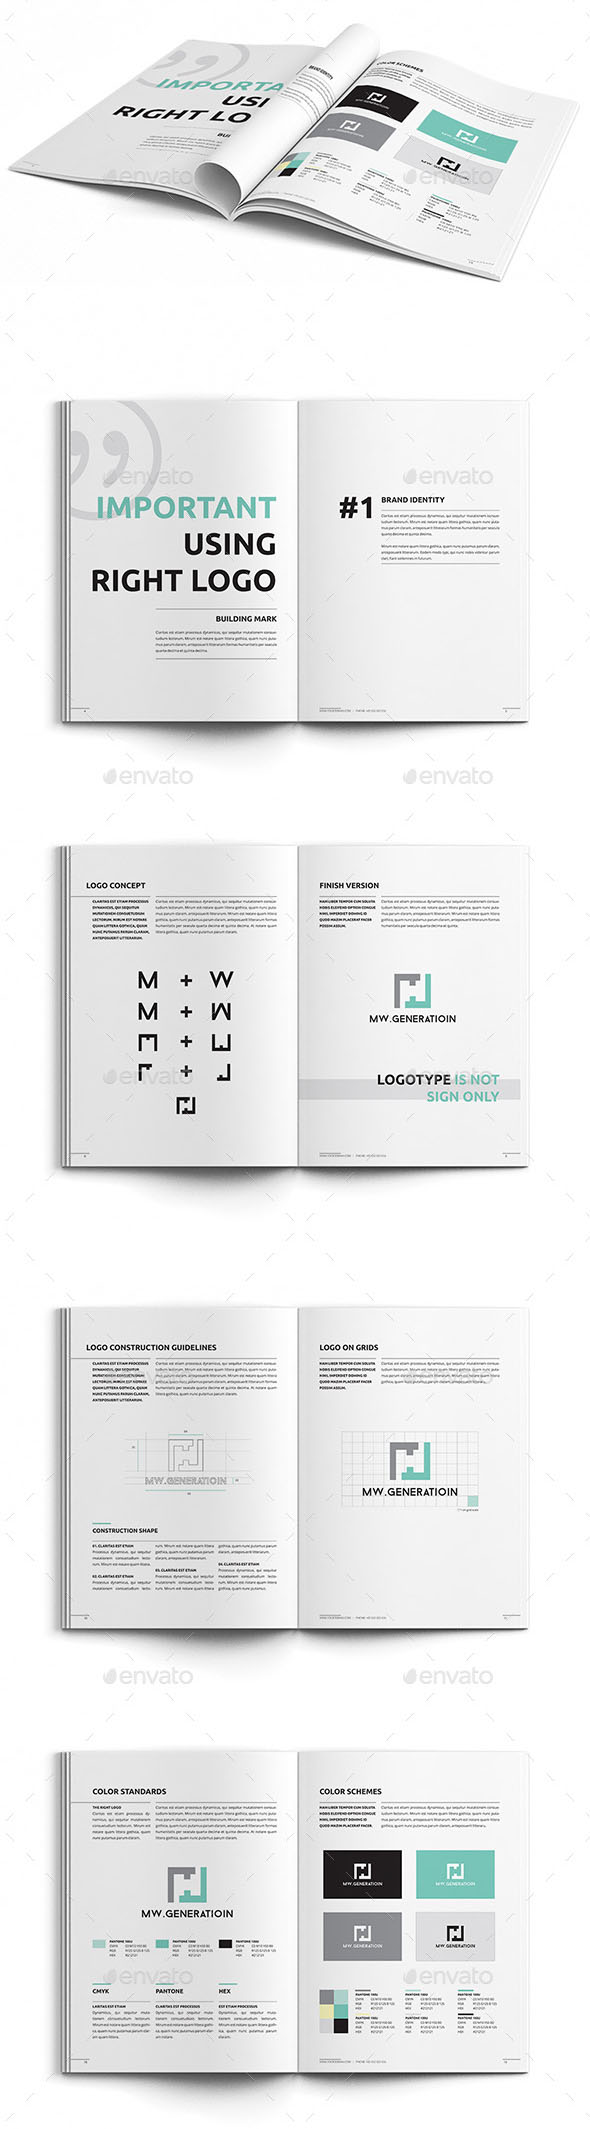 Brand Identity Guidelines, The Company Profile